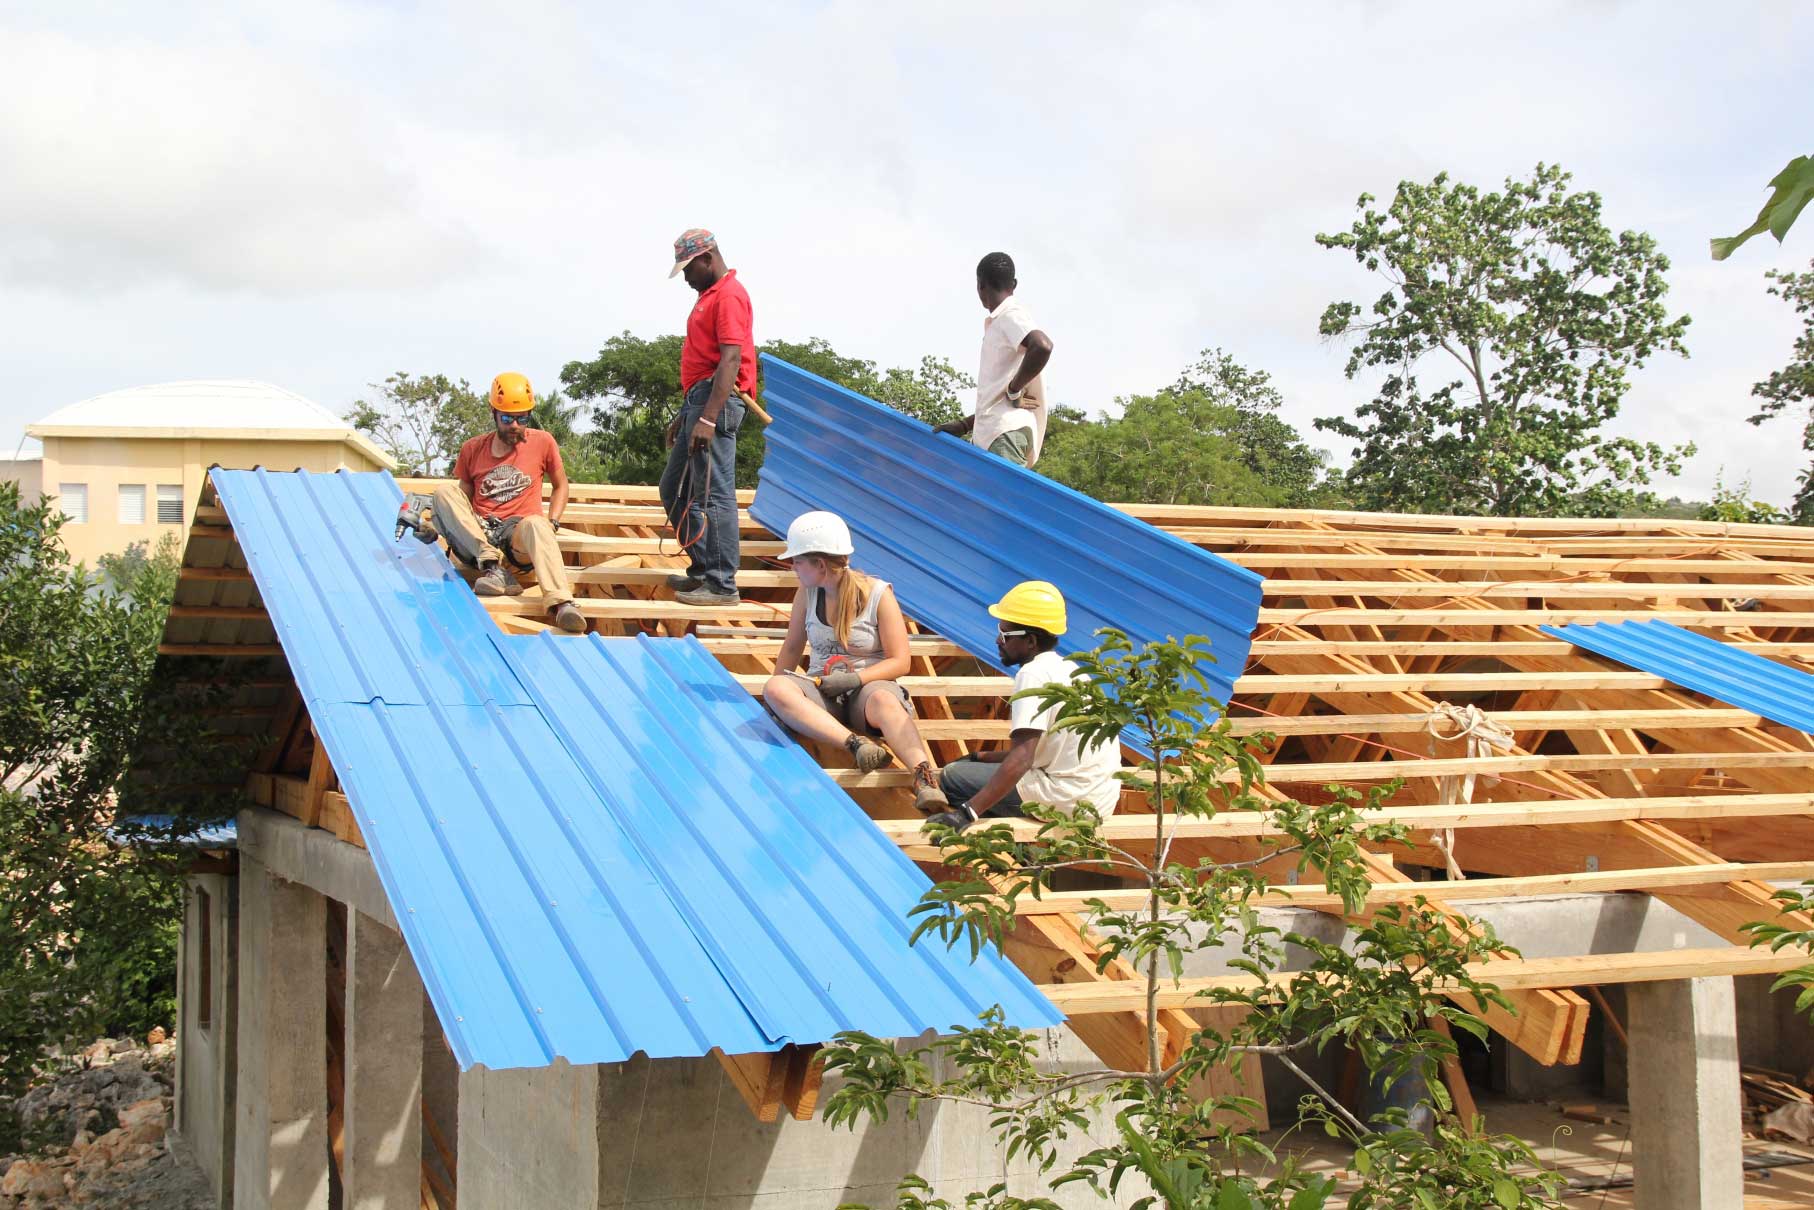 Employees of the project EWB by covering the roof in Beaumont